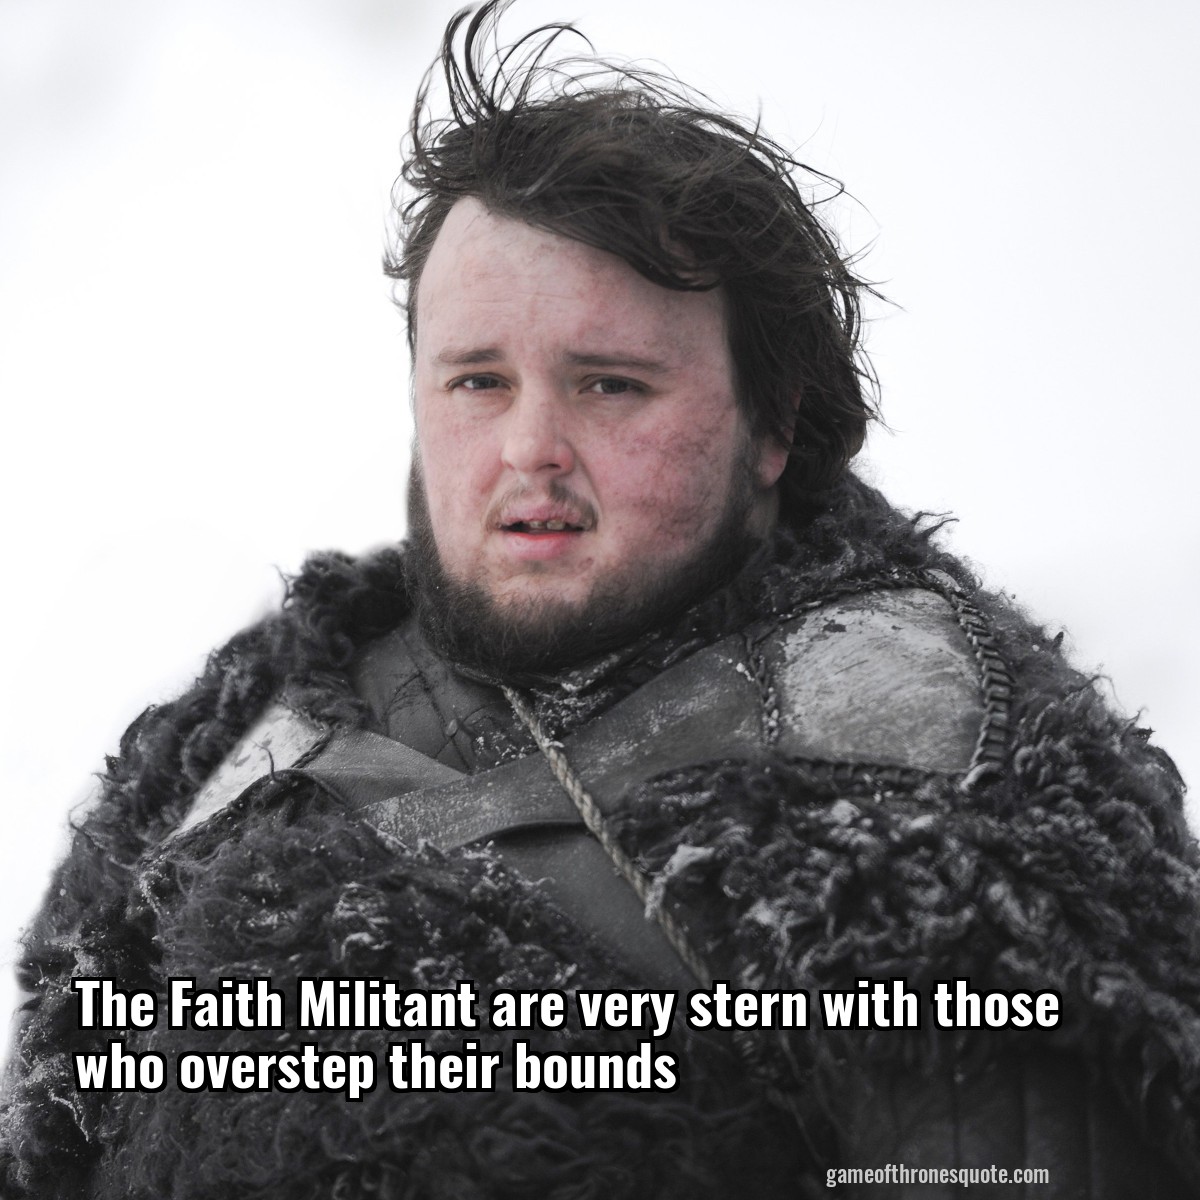 The Faith Militant are very stern with those who overstep their bounds